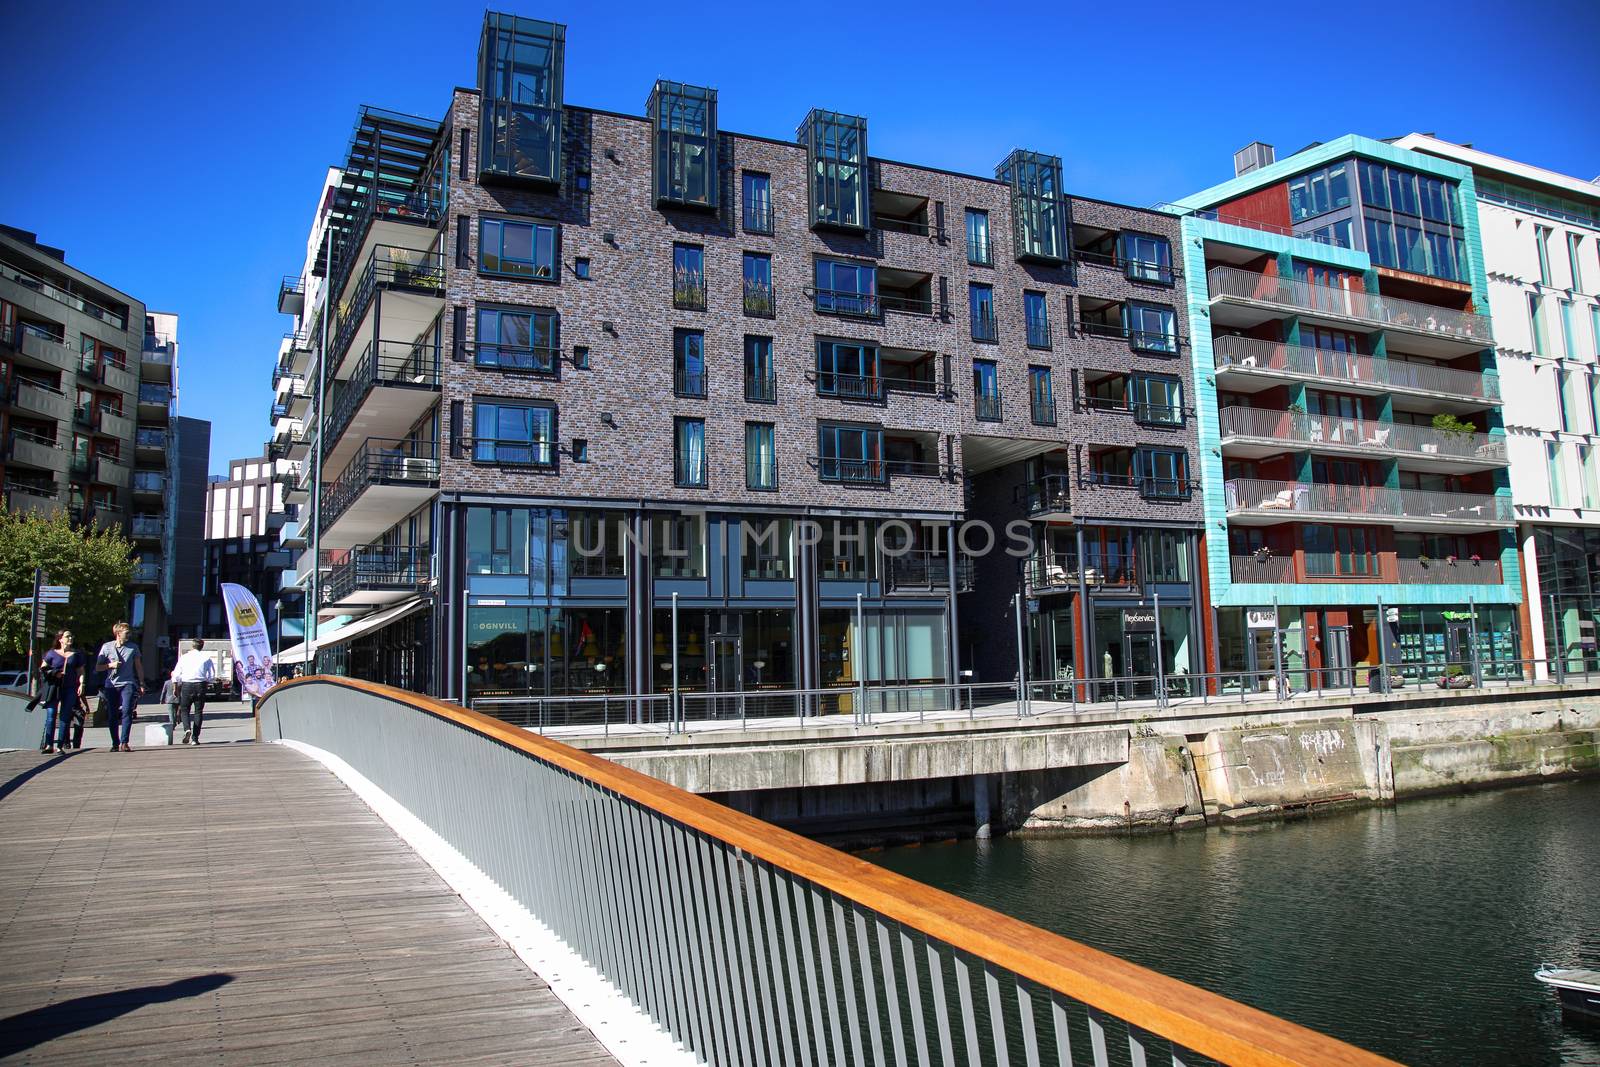 OSLO, NORWAY – AUGUST 17, 2016: People walking on modern district on street Stranden, Aker Brygge district with lux apartments, shopping, culture and restaurants in Oslo, Norway on August 17,2016.